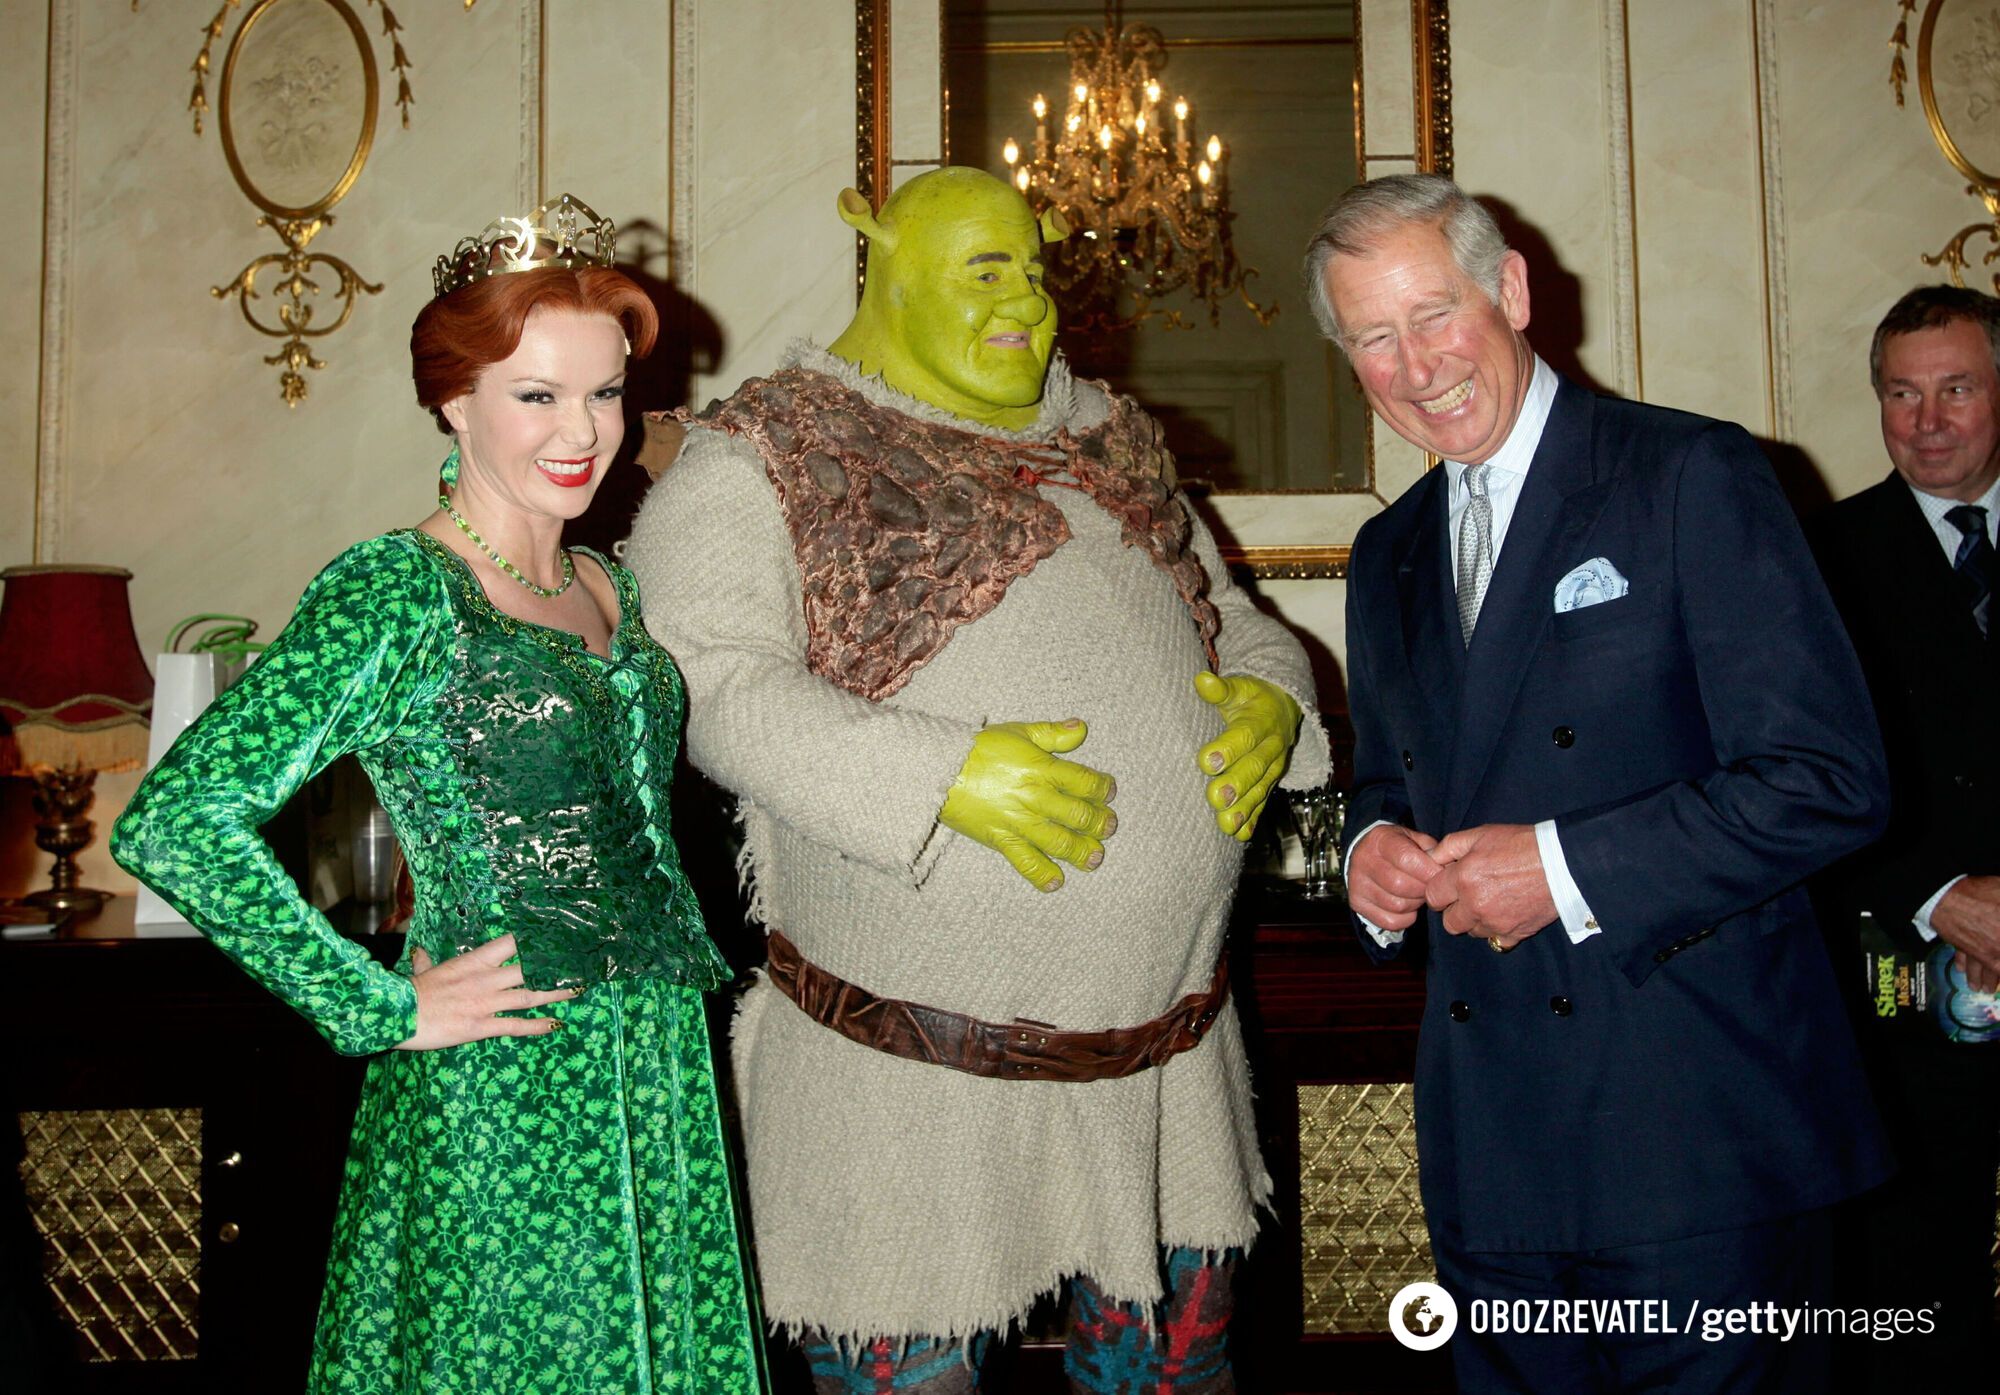 Prince Harry shows his tongue and King Charles poses with Shrek. 20 funny photos of the royal family